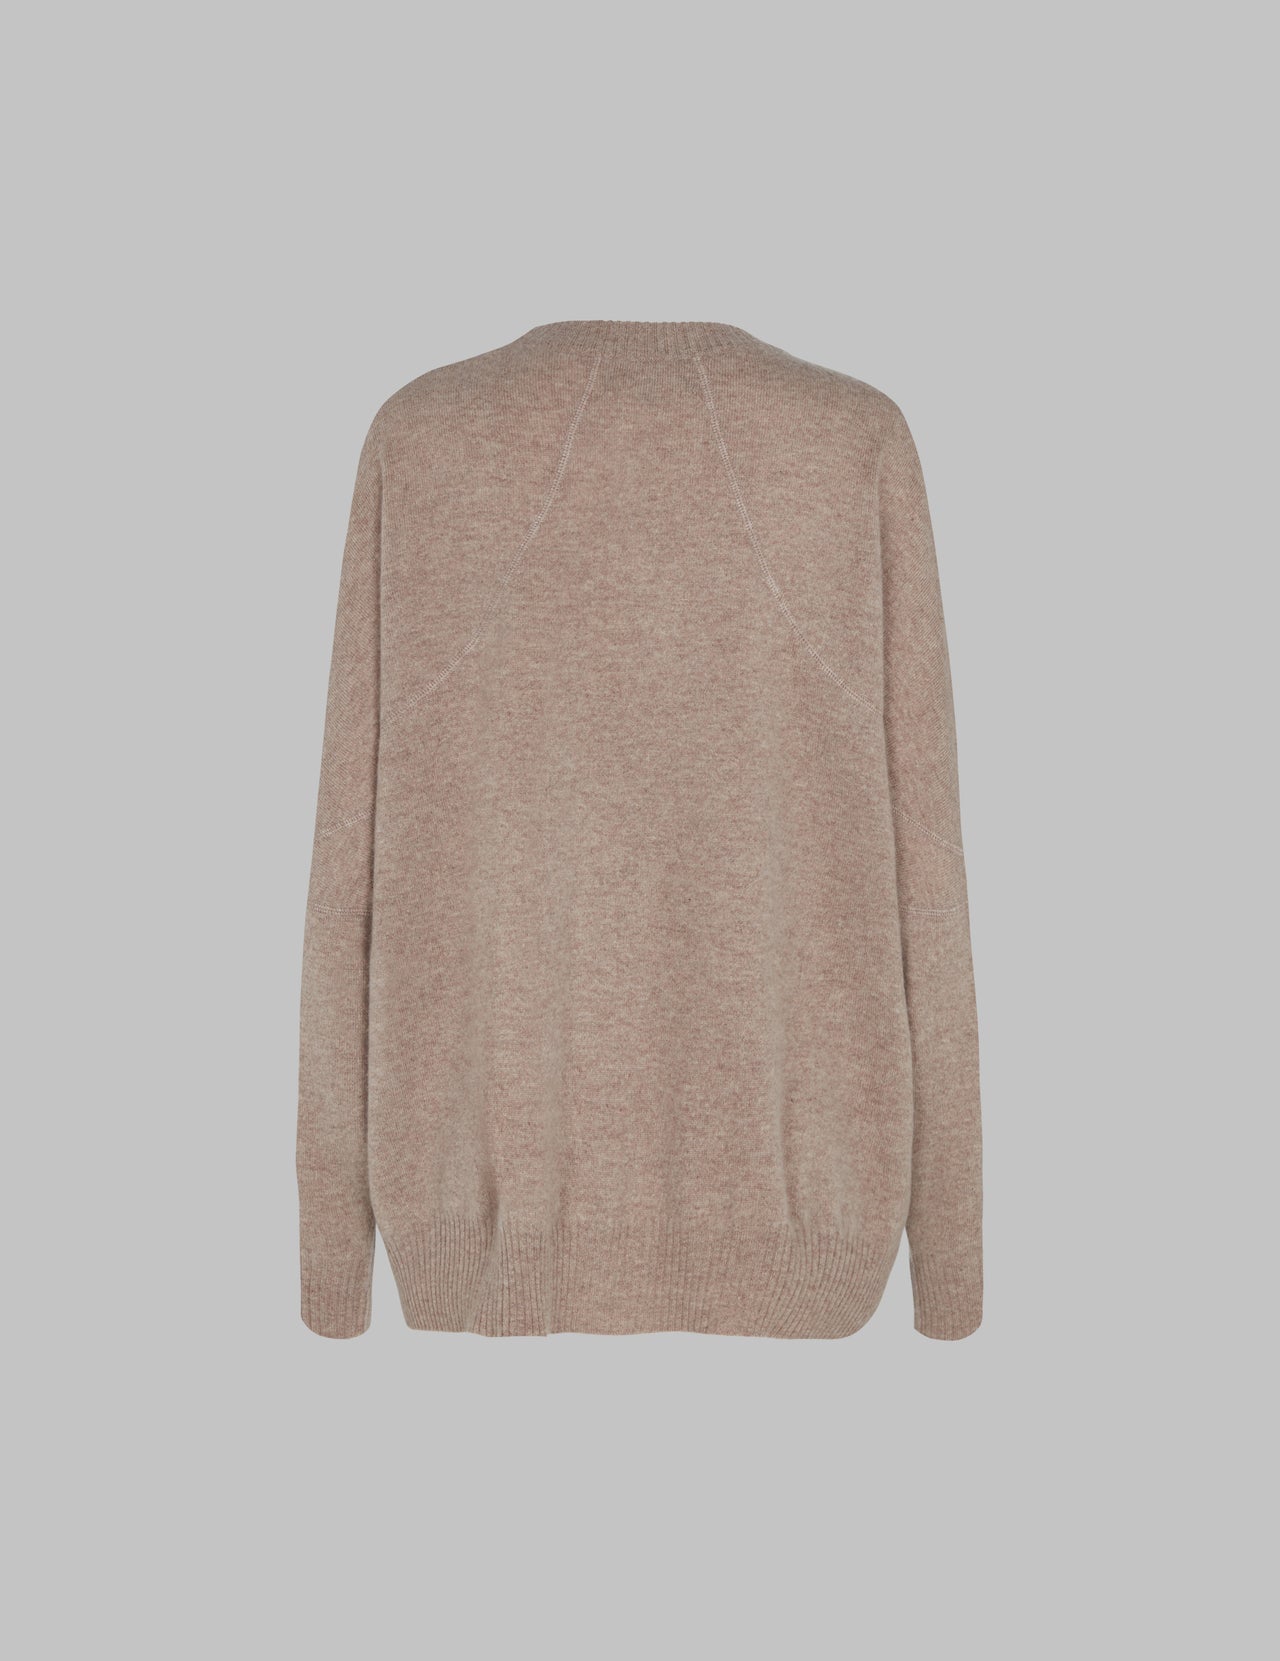  Winged Sleeve Cashmere Sweater 